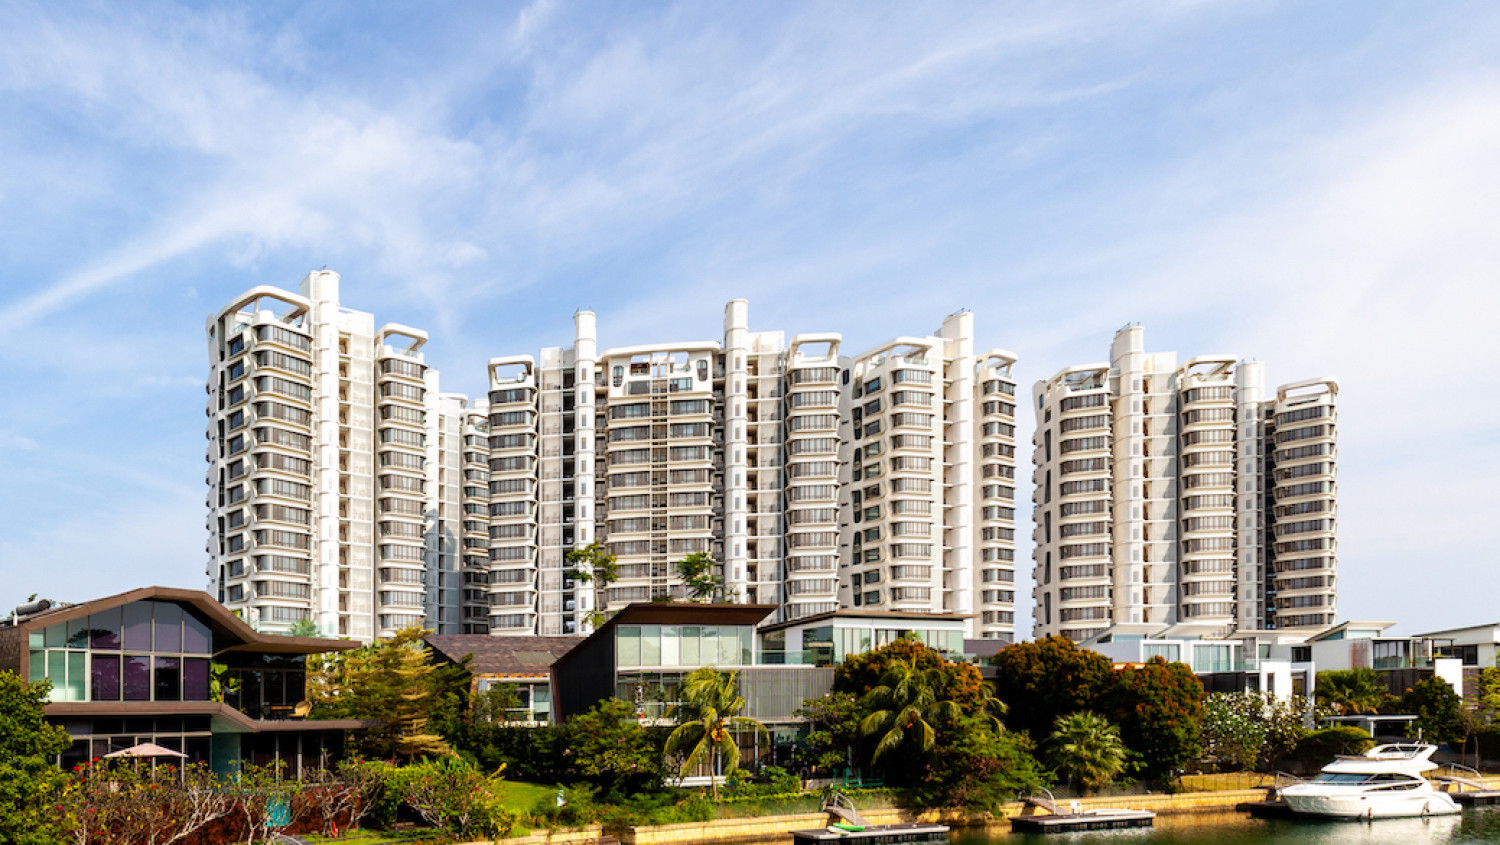 Launch of Cape Royale spurs interest in Sentosa Cove homes - Property News